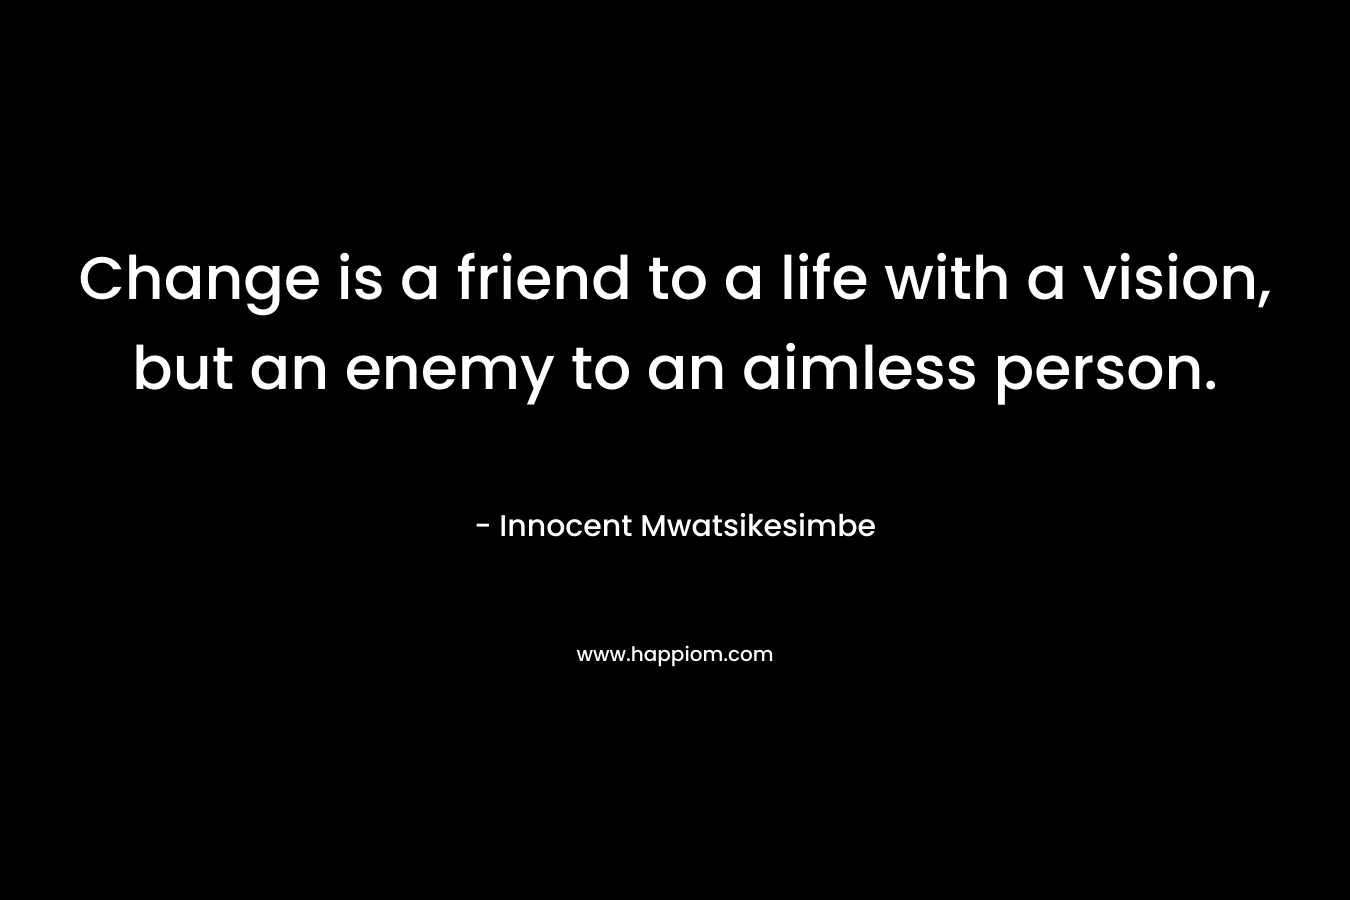 Change is a friend to a life with a vision, but an enemy to an aimless person.